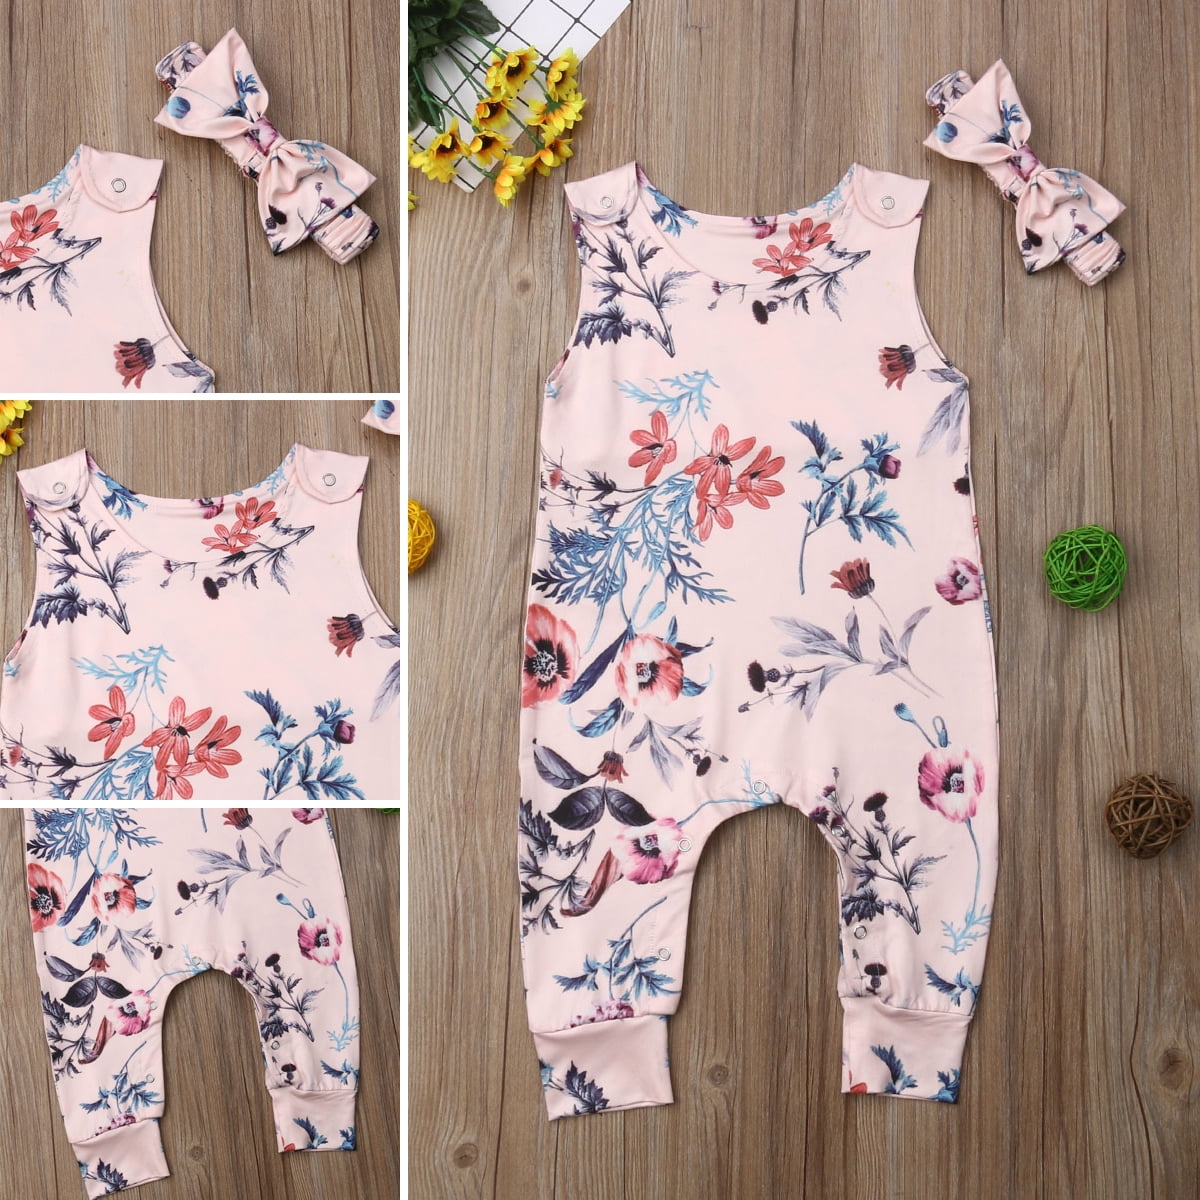 Newborn Toddler Infant Baby Girl Floral Jumpsuit Romper Bodysuit Outfits Clothes 